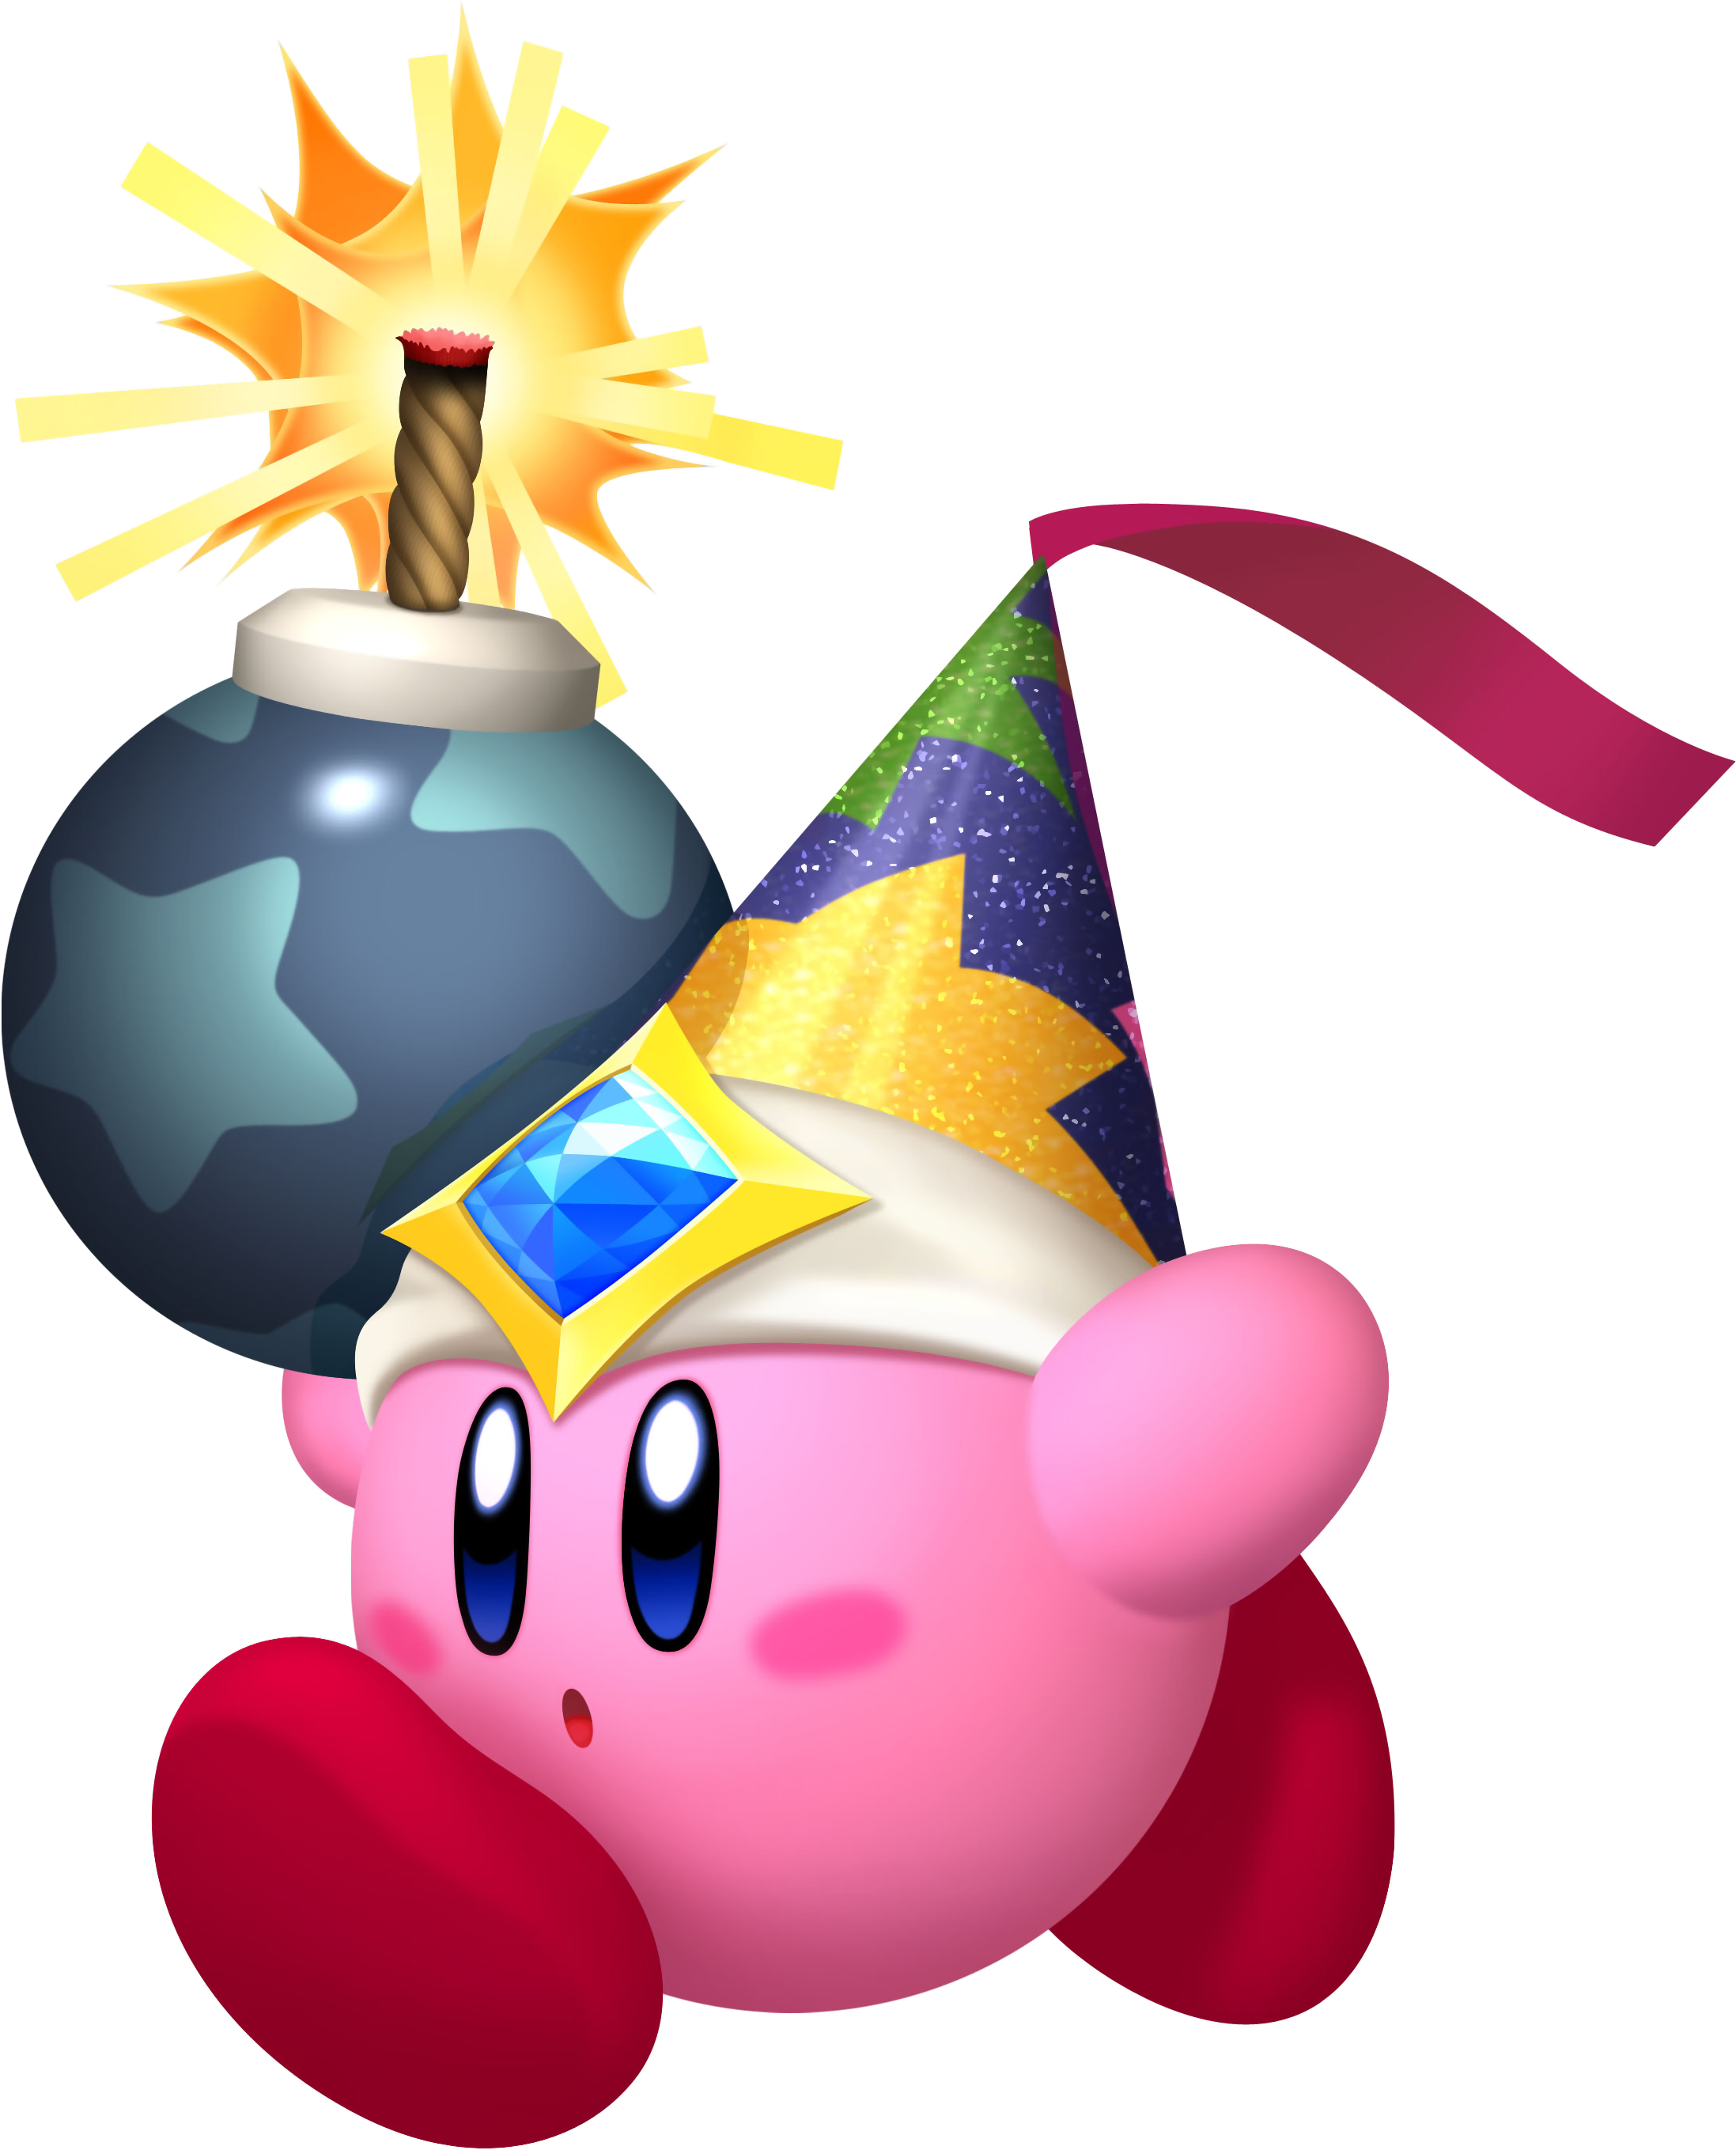 all kirby forms